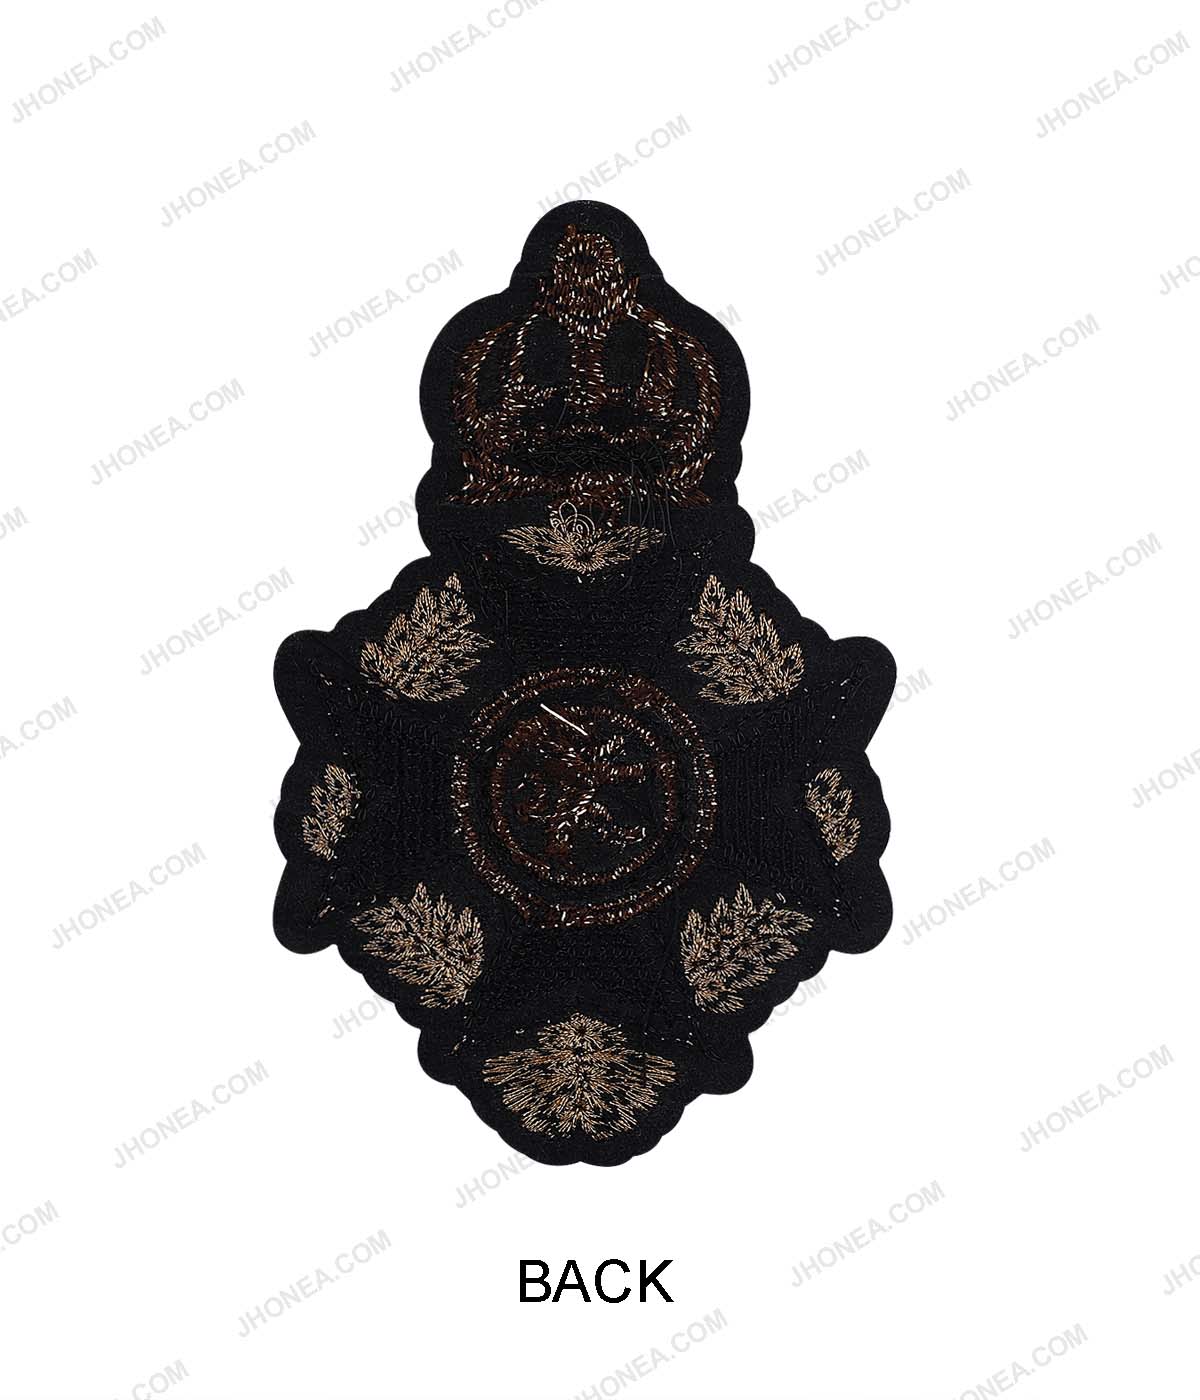 Royal Empire Leopold Patch for Men's Clothing